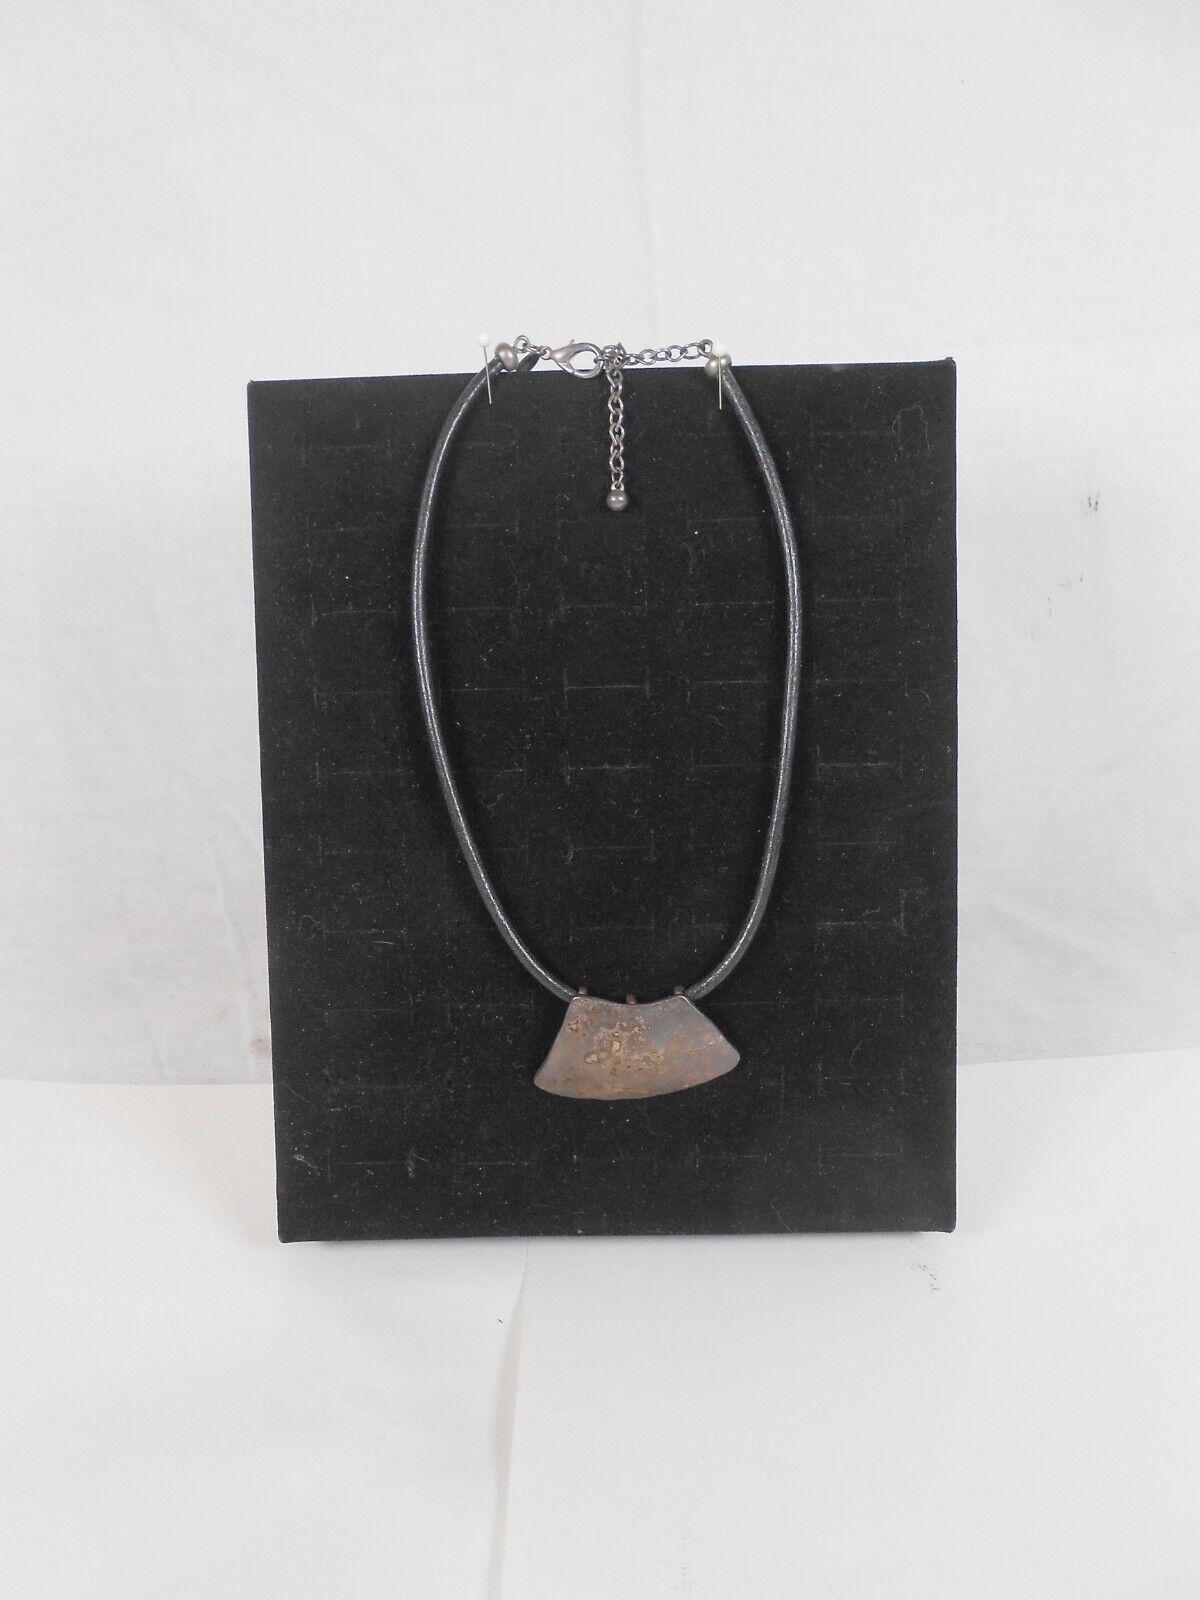 Primary image for Chico's Choker Necklace with Leather with Hammered aged Metal Pendant